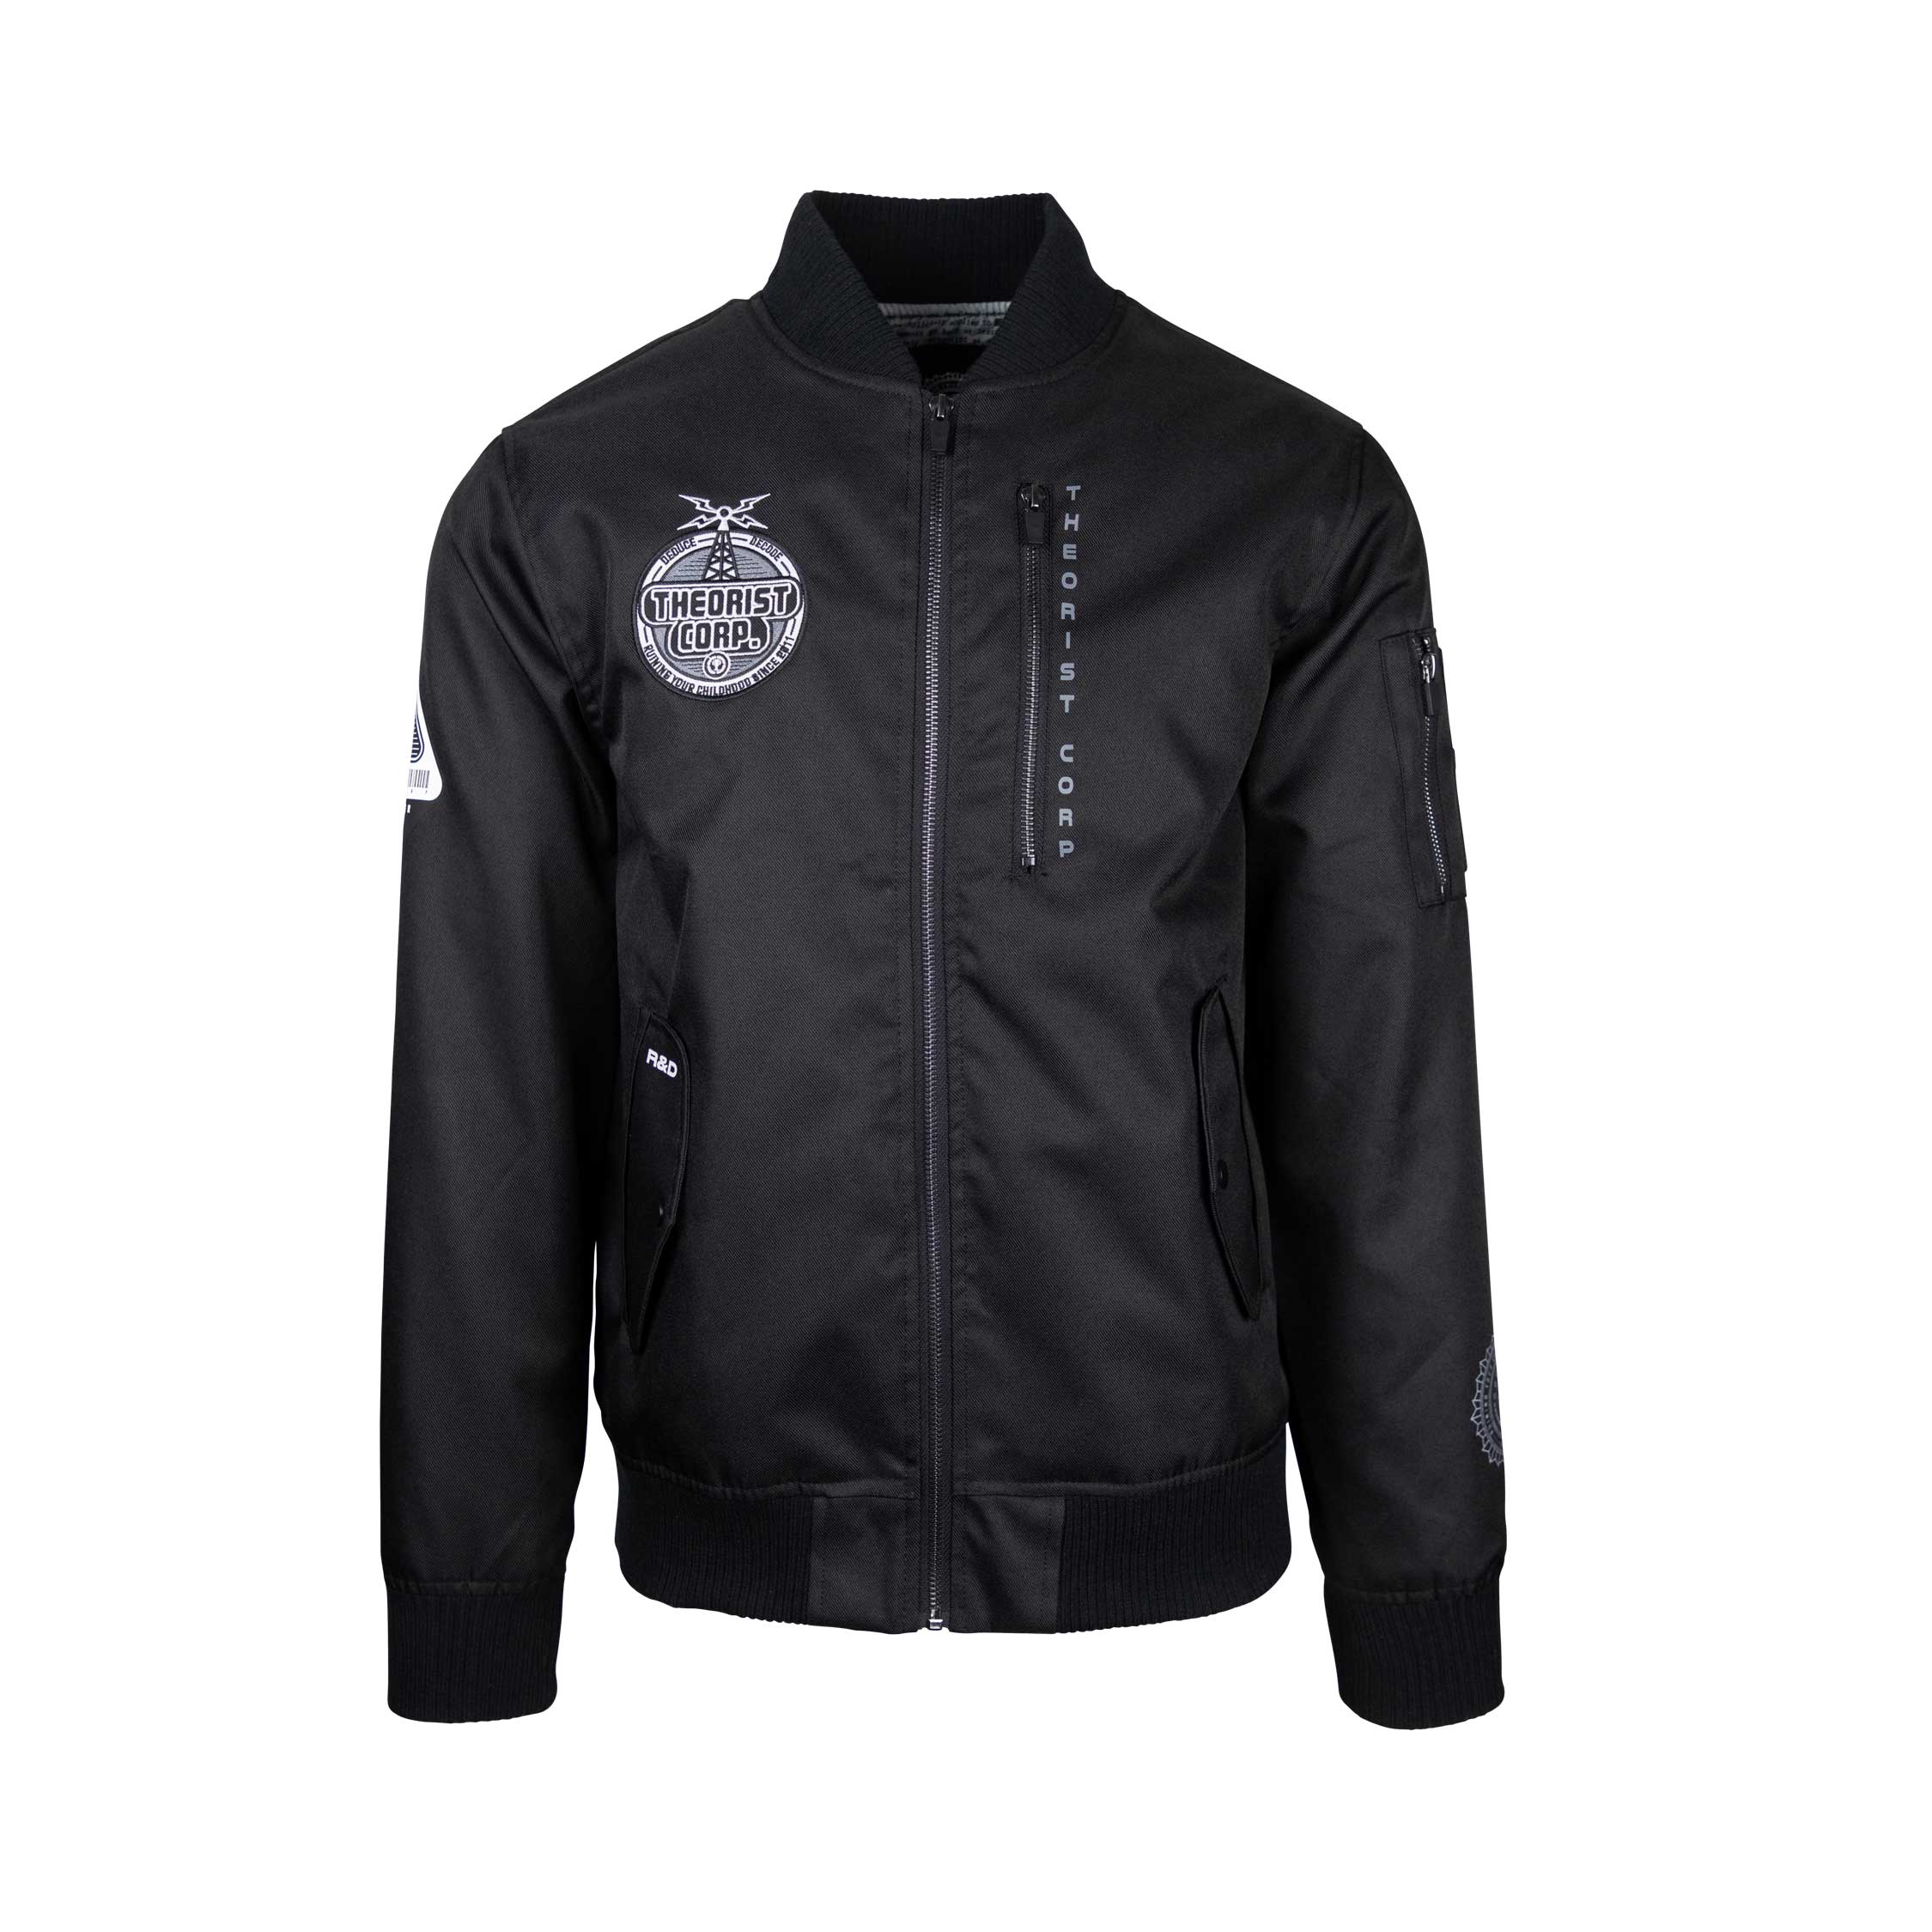 Research Team Bomber Jacket GT2909 XS Official Game Theory Merch